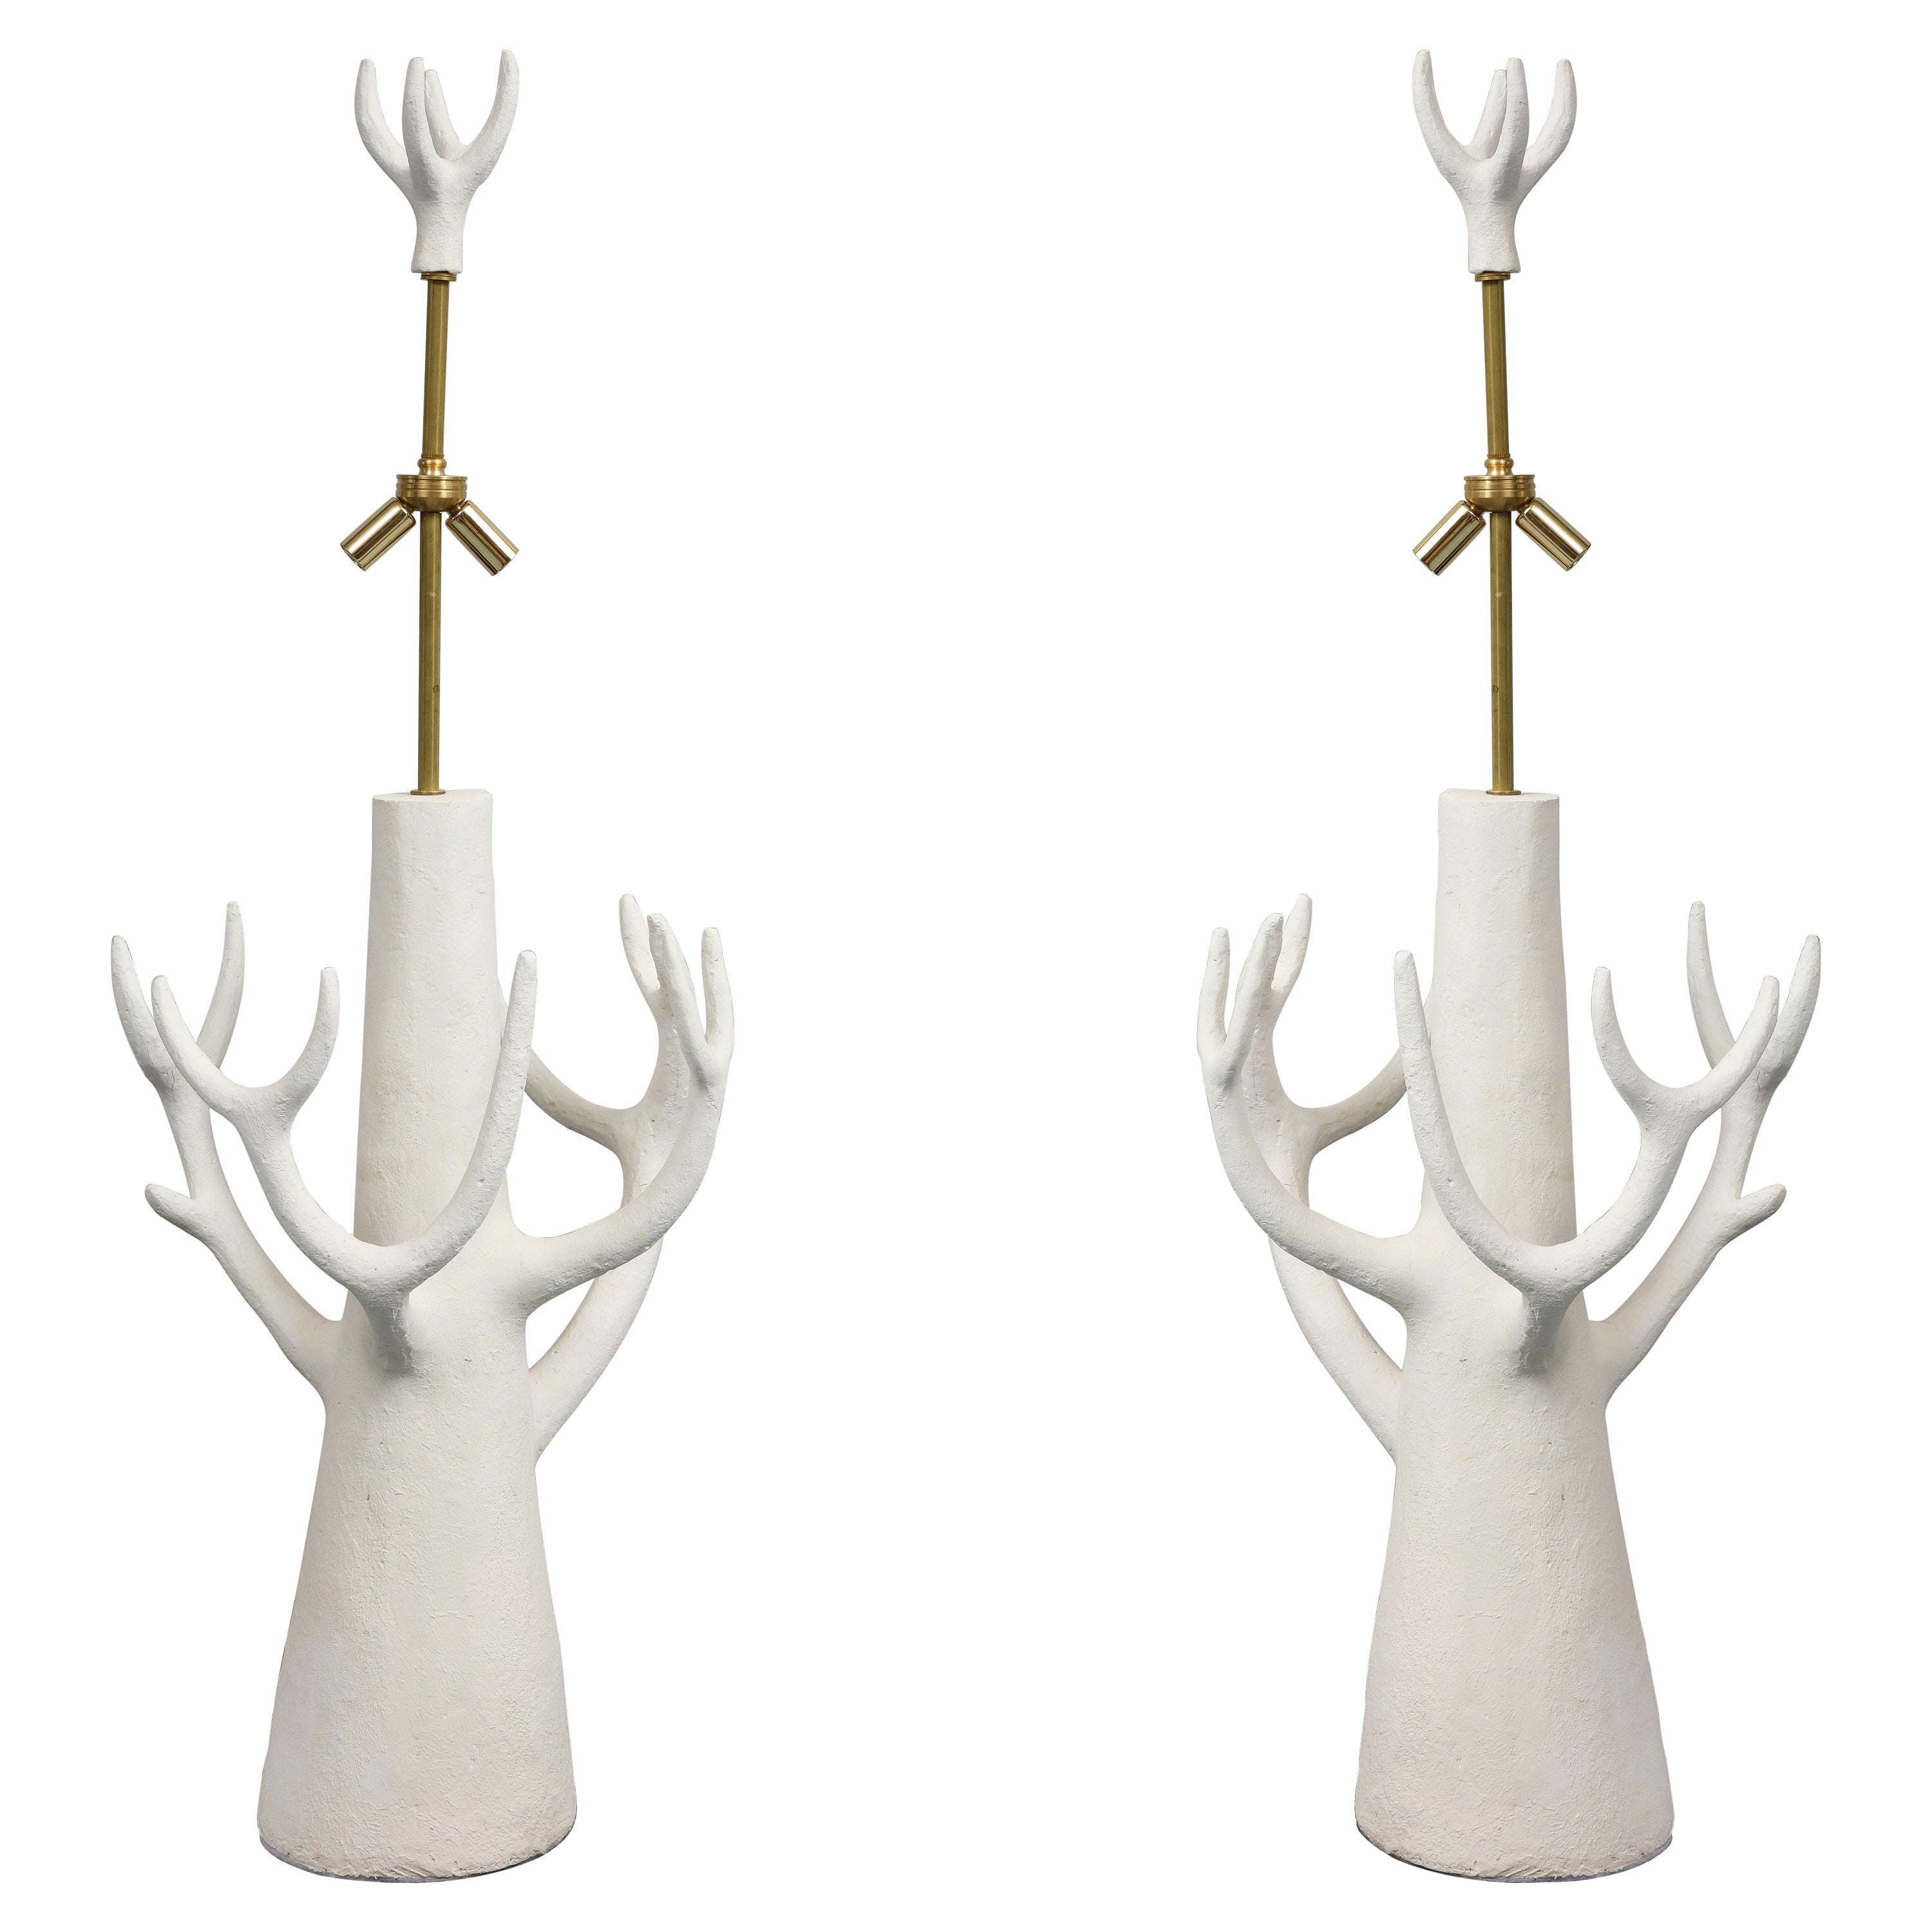 This pair of lamps in white ceramic was created by the sculptor Jacques Darbaud.  Tree was probably the inspiration. The lamps  are American wired. These lamps  can be considered as well as sculptures. 